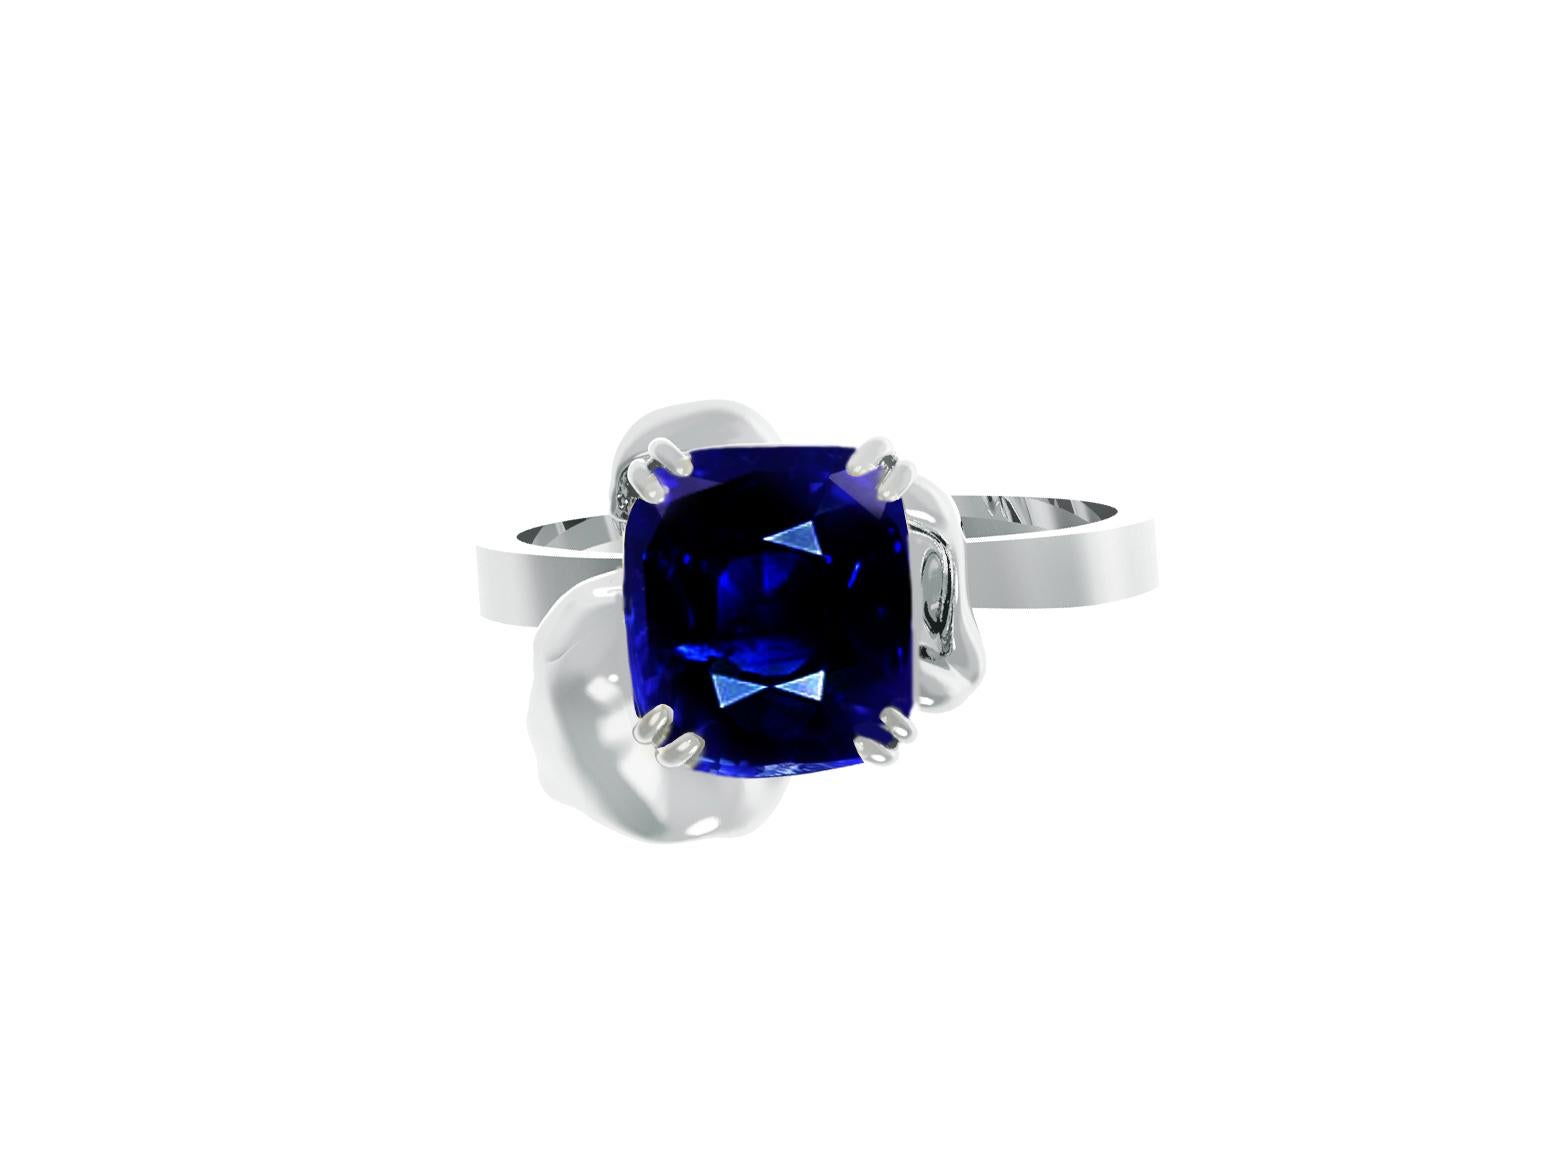 Eighteen Karat White Gold Contemporary Bridal Ring with Cushion Sapphire For Sale 1